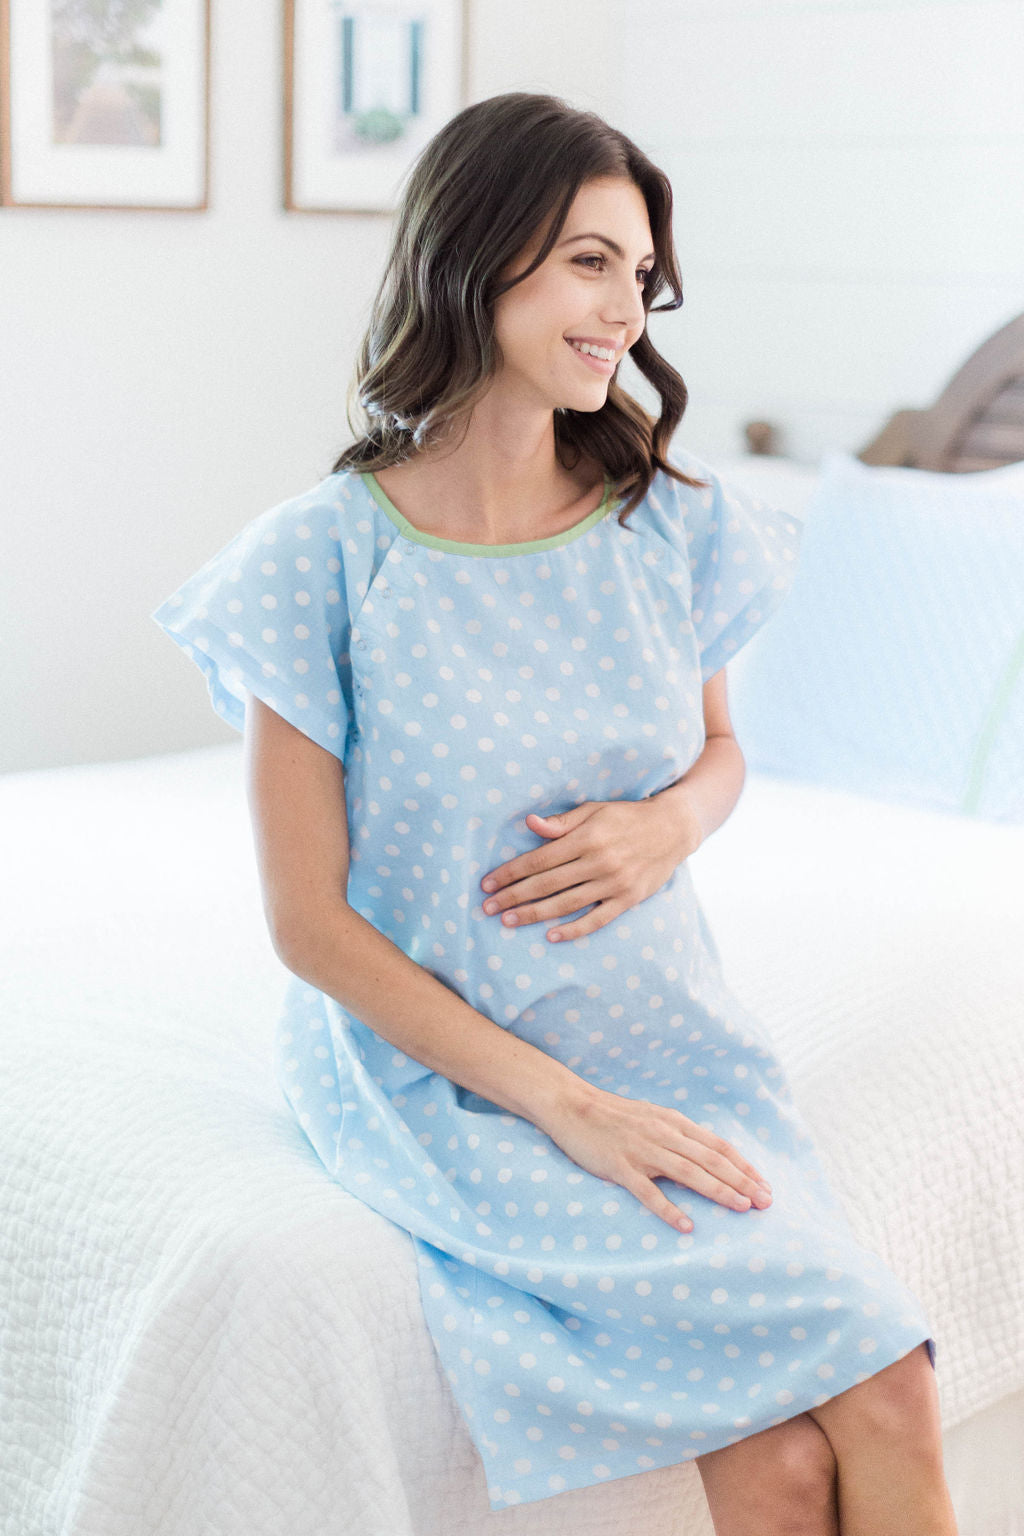 Baby Be Mine 3 in 1 Labor/Delivery/Nursing Hospital Gown Maternity, Hospital  Bag Must Have (L/XL, Marie) in Dubai - UAE | Whizz Clothing